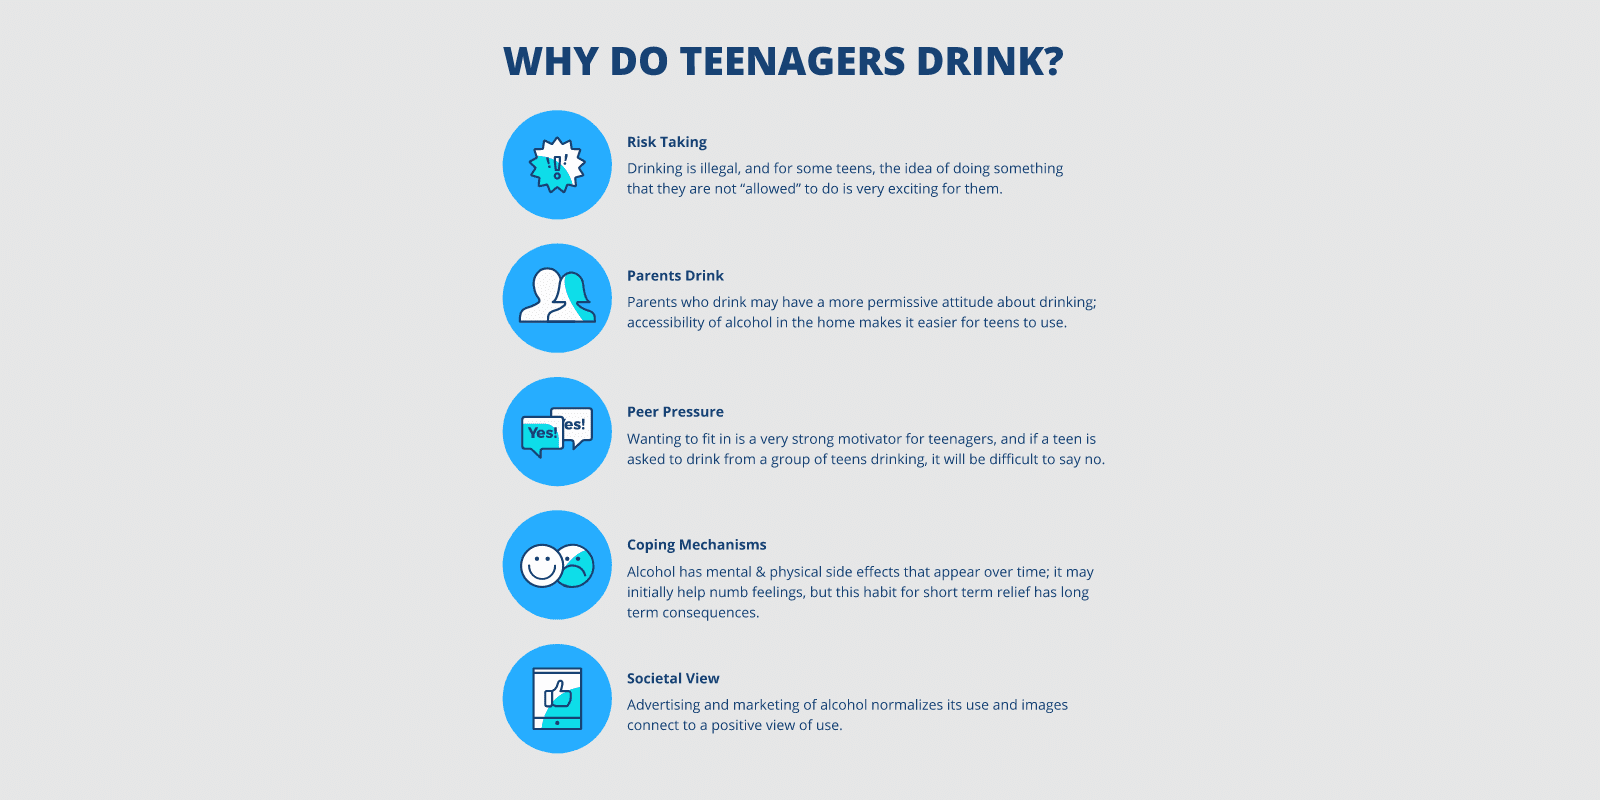 Reasons why teenagers drink laid out in a visually appealing way